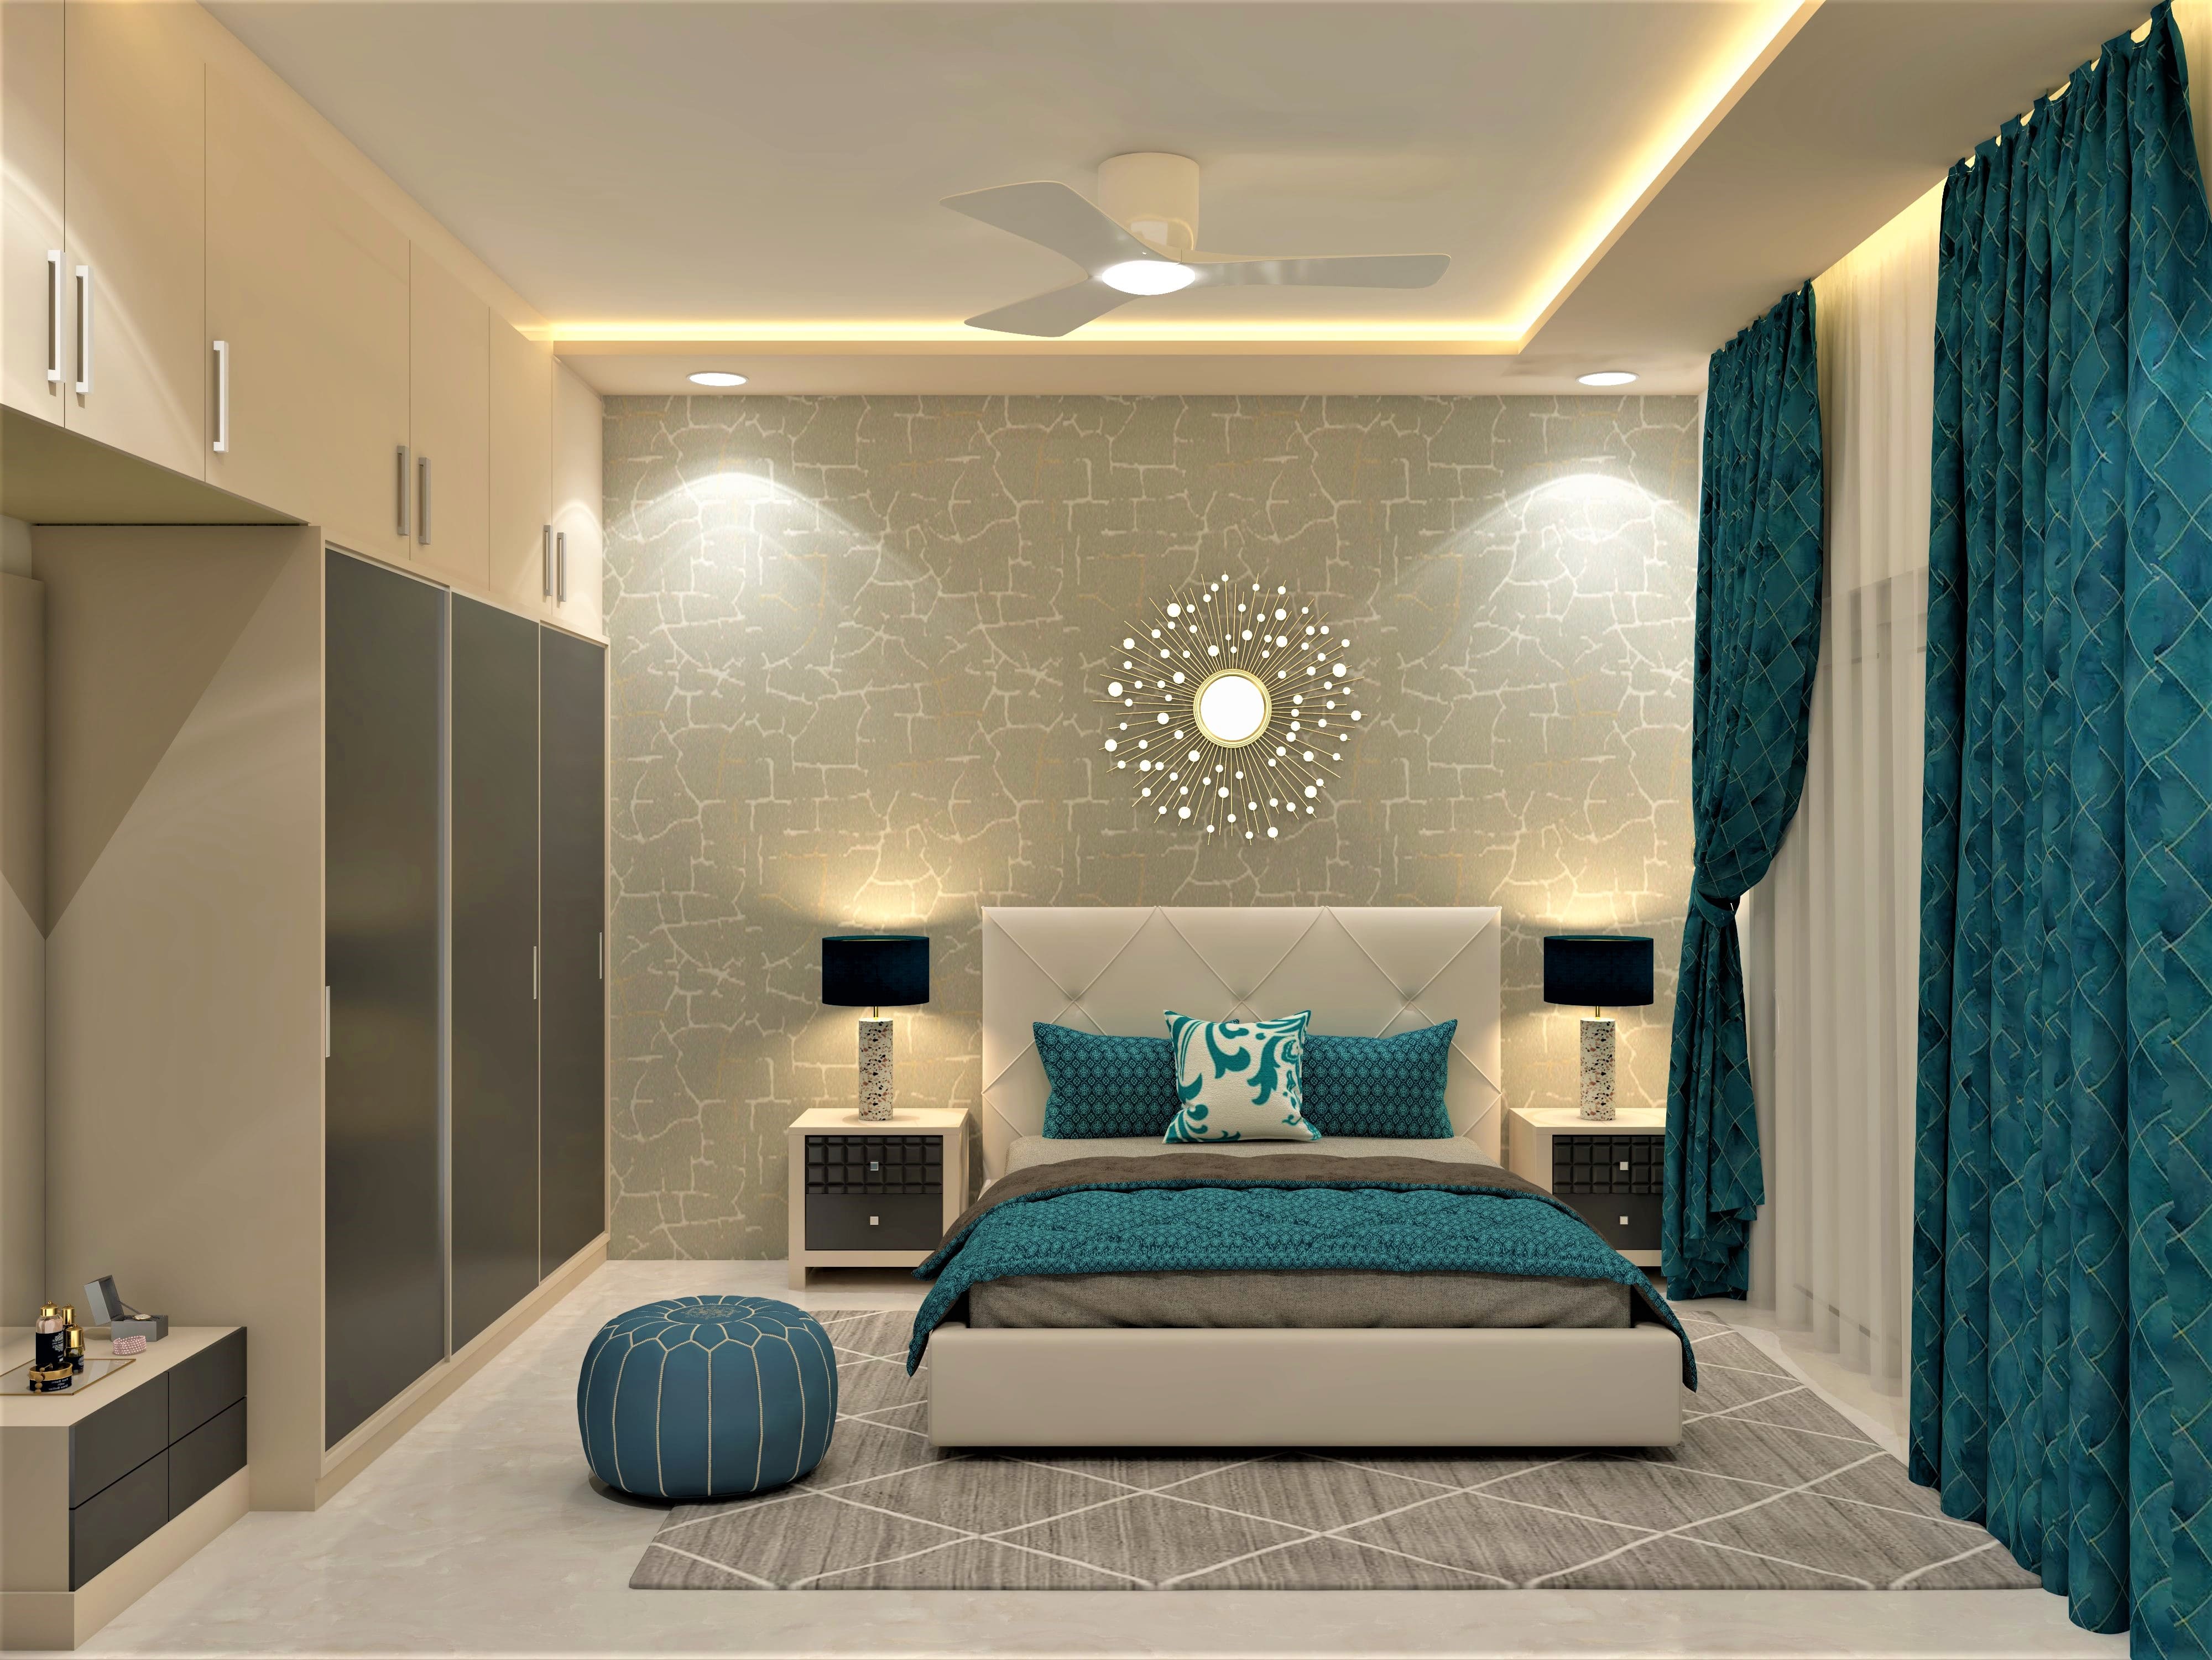 Grey bedroom design with teal furnishings - Beautiful Homes